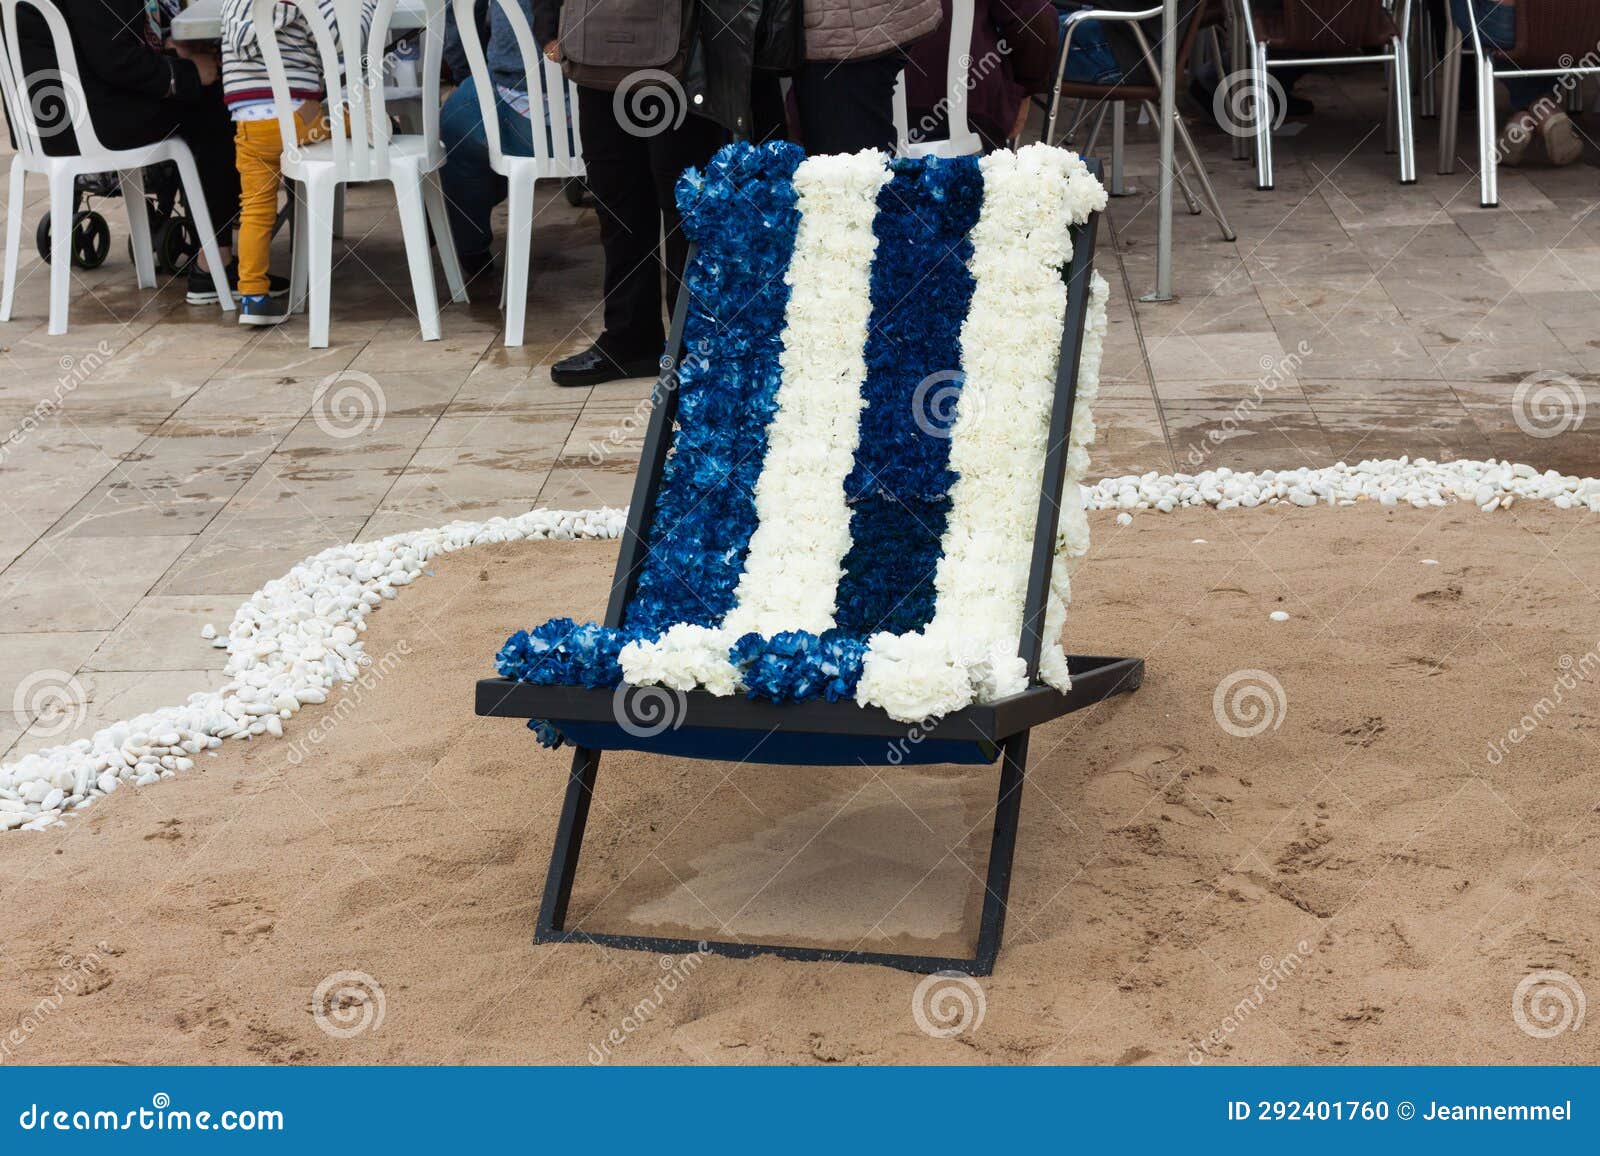 sunbed, decorated with blue and white flowers, on 